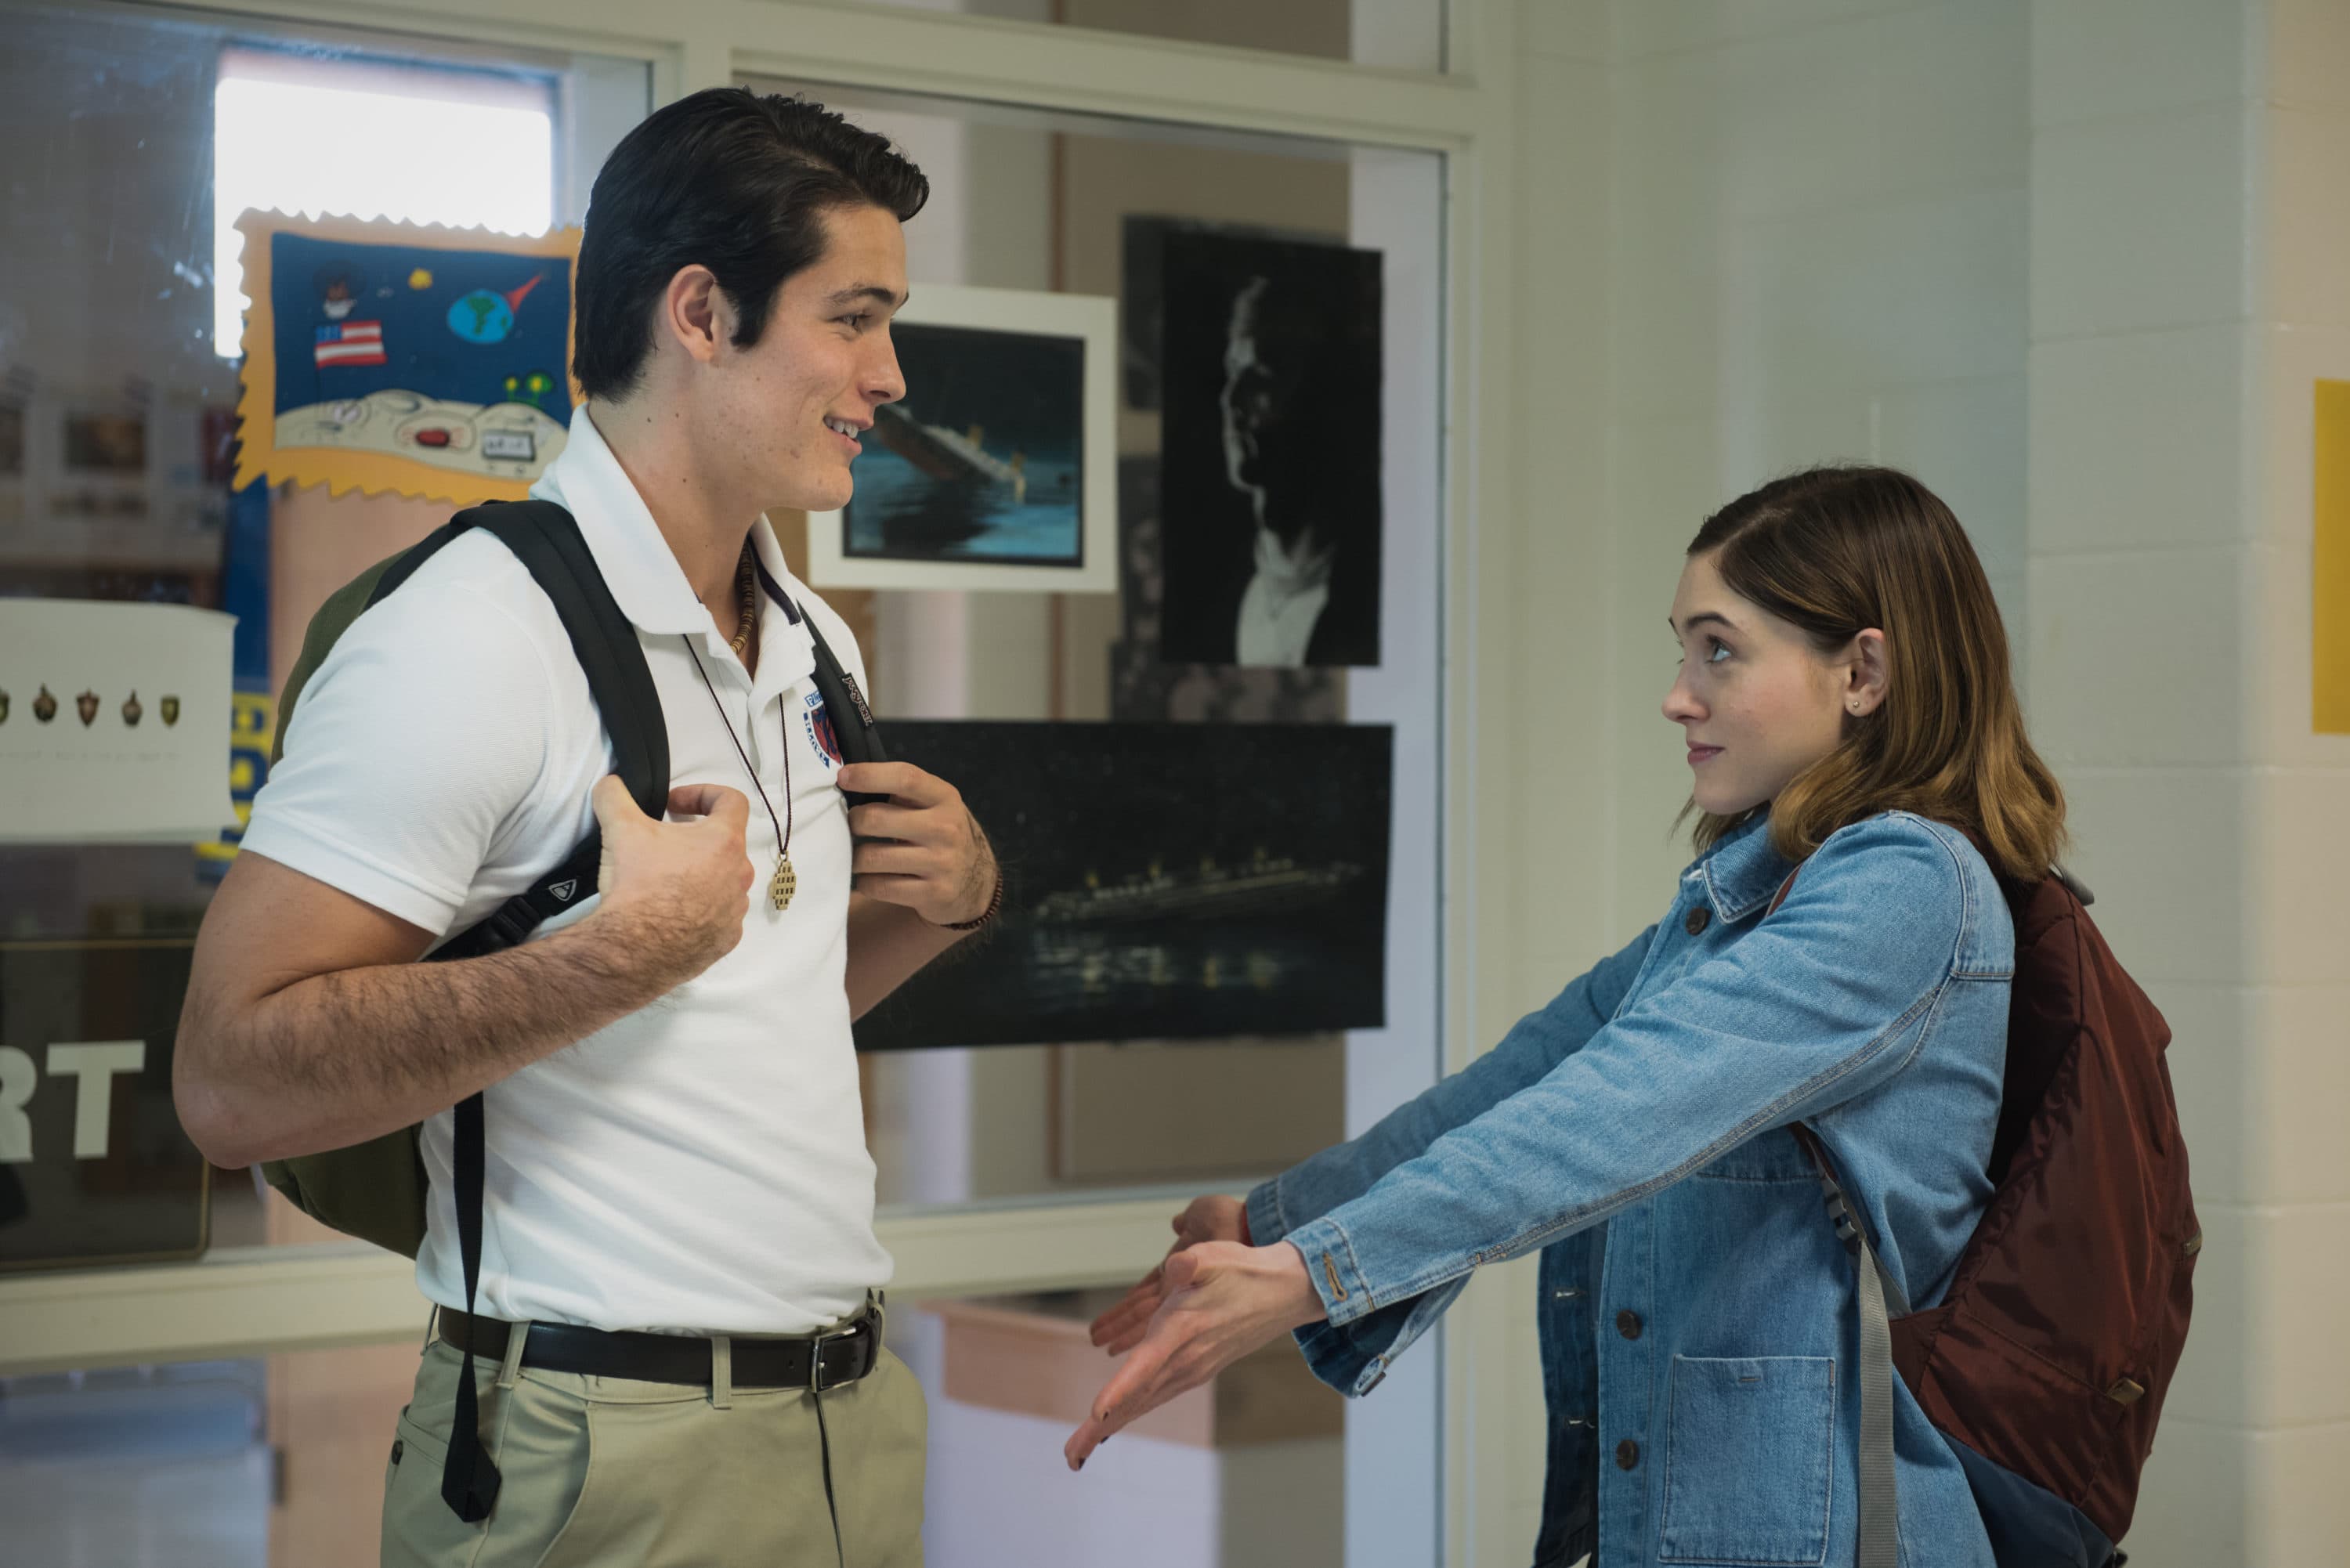 Naughty School Girl - Funny And Sweet, Coming-Of-Age Film 'Yes, God, Yes' Follows A Catholic  Schoolgirl Making Sense Of Her Sexuality | WBUR News